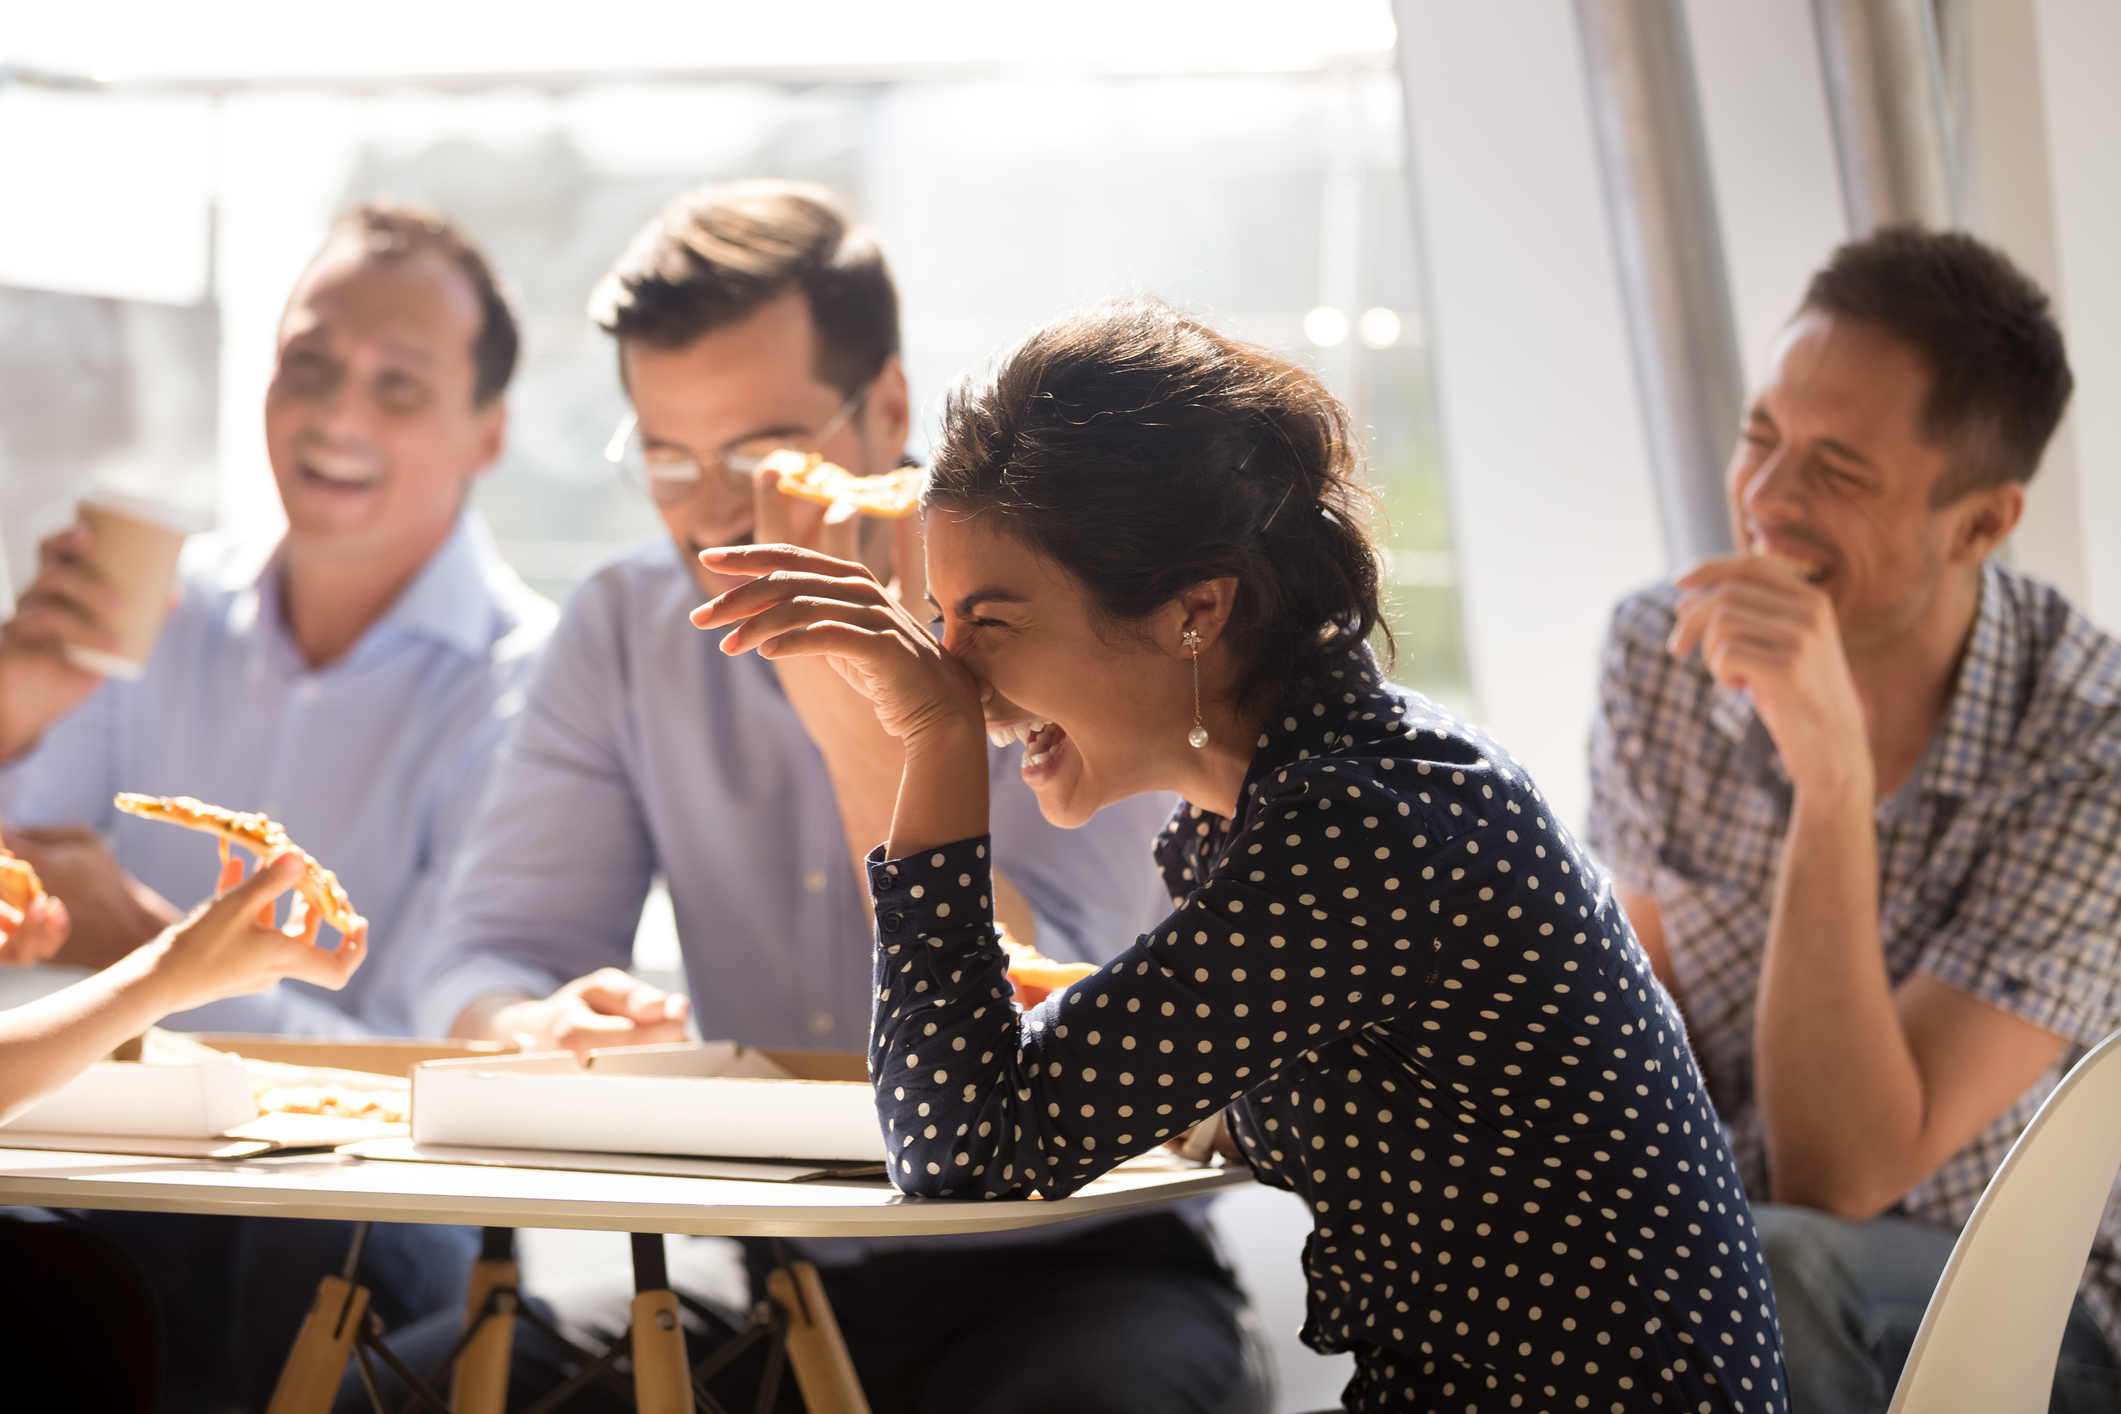 Employee Stress Level & Performance: How to Help Your Team Thrive